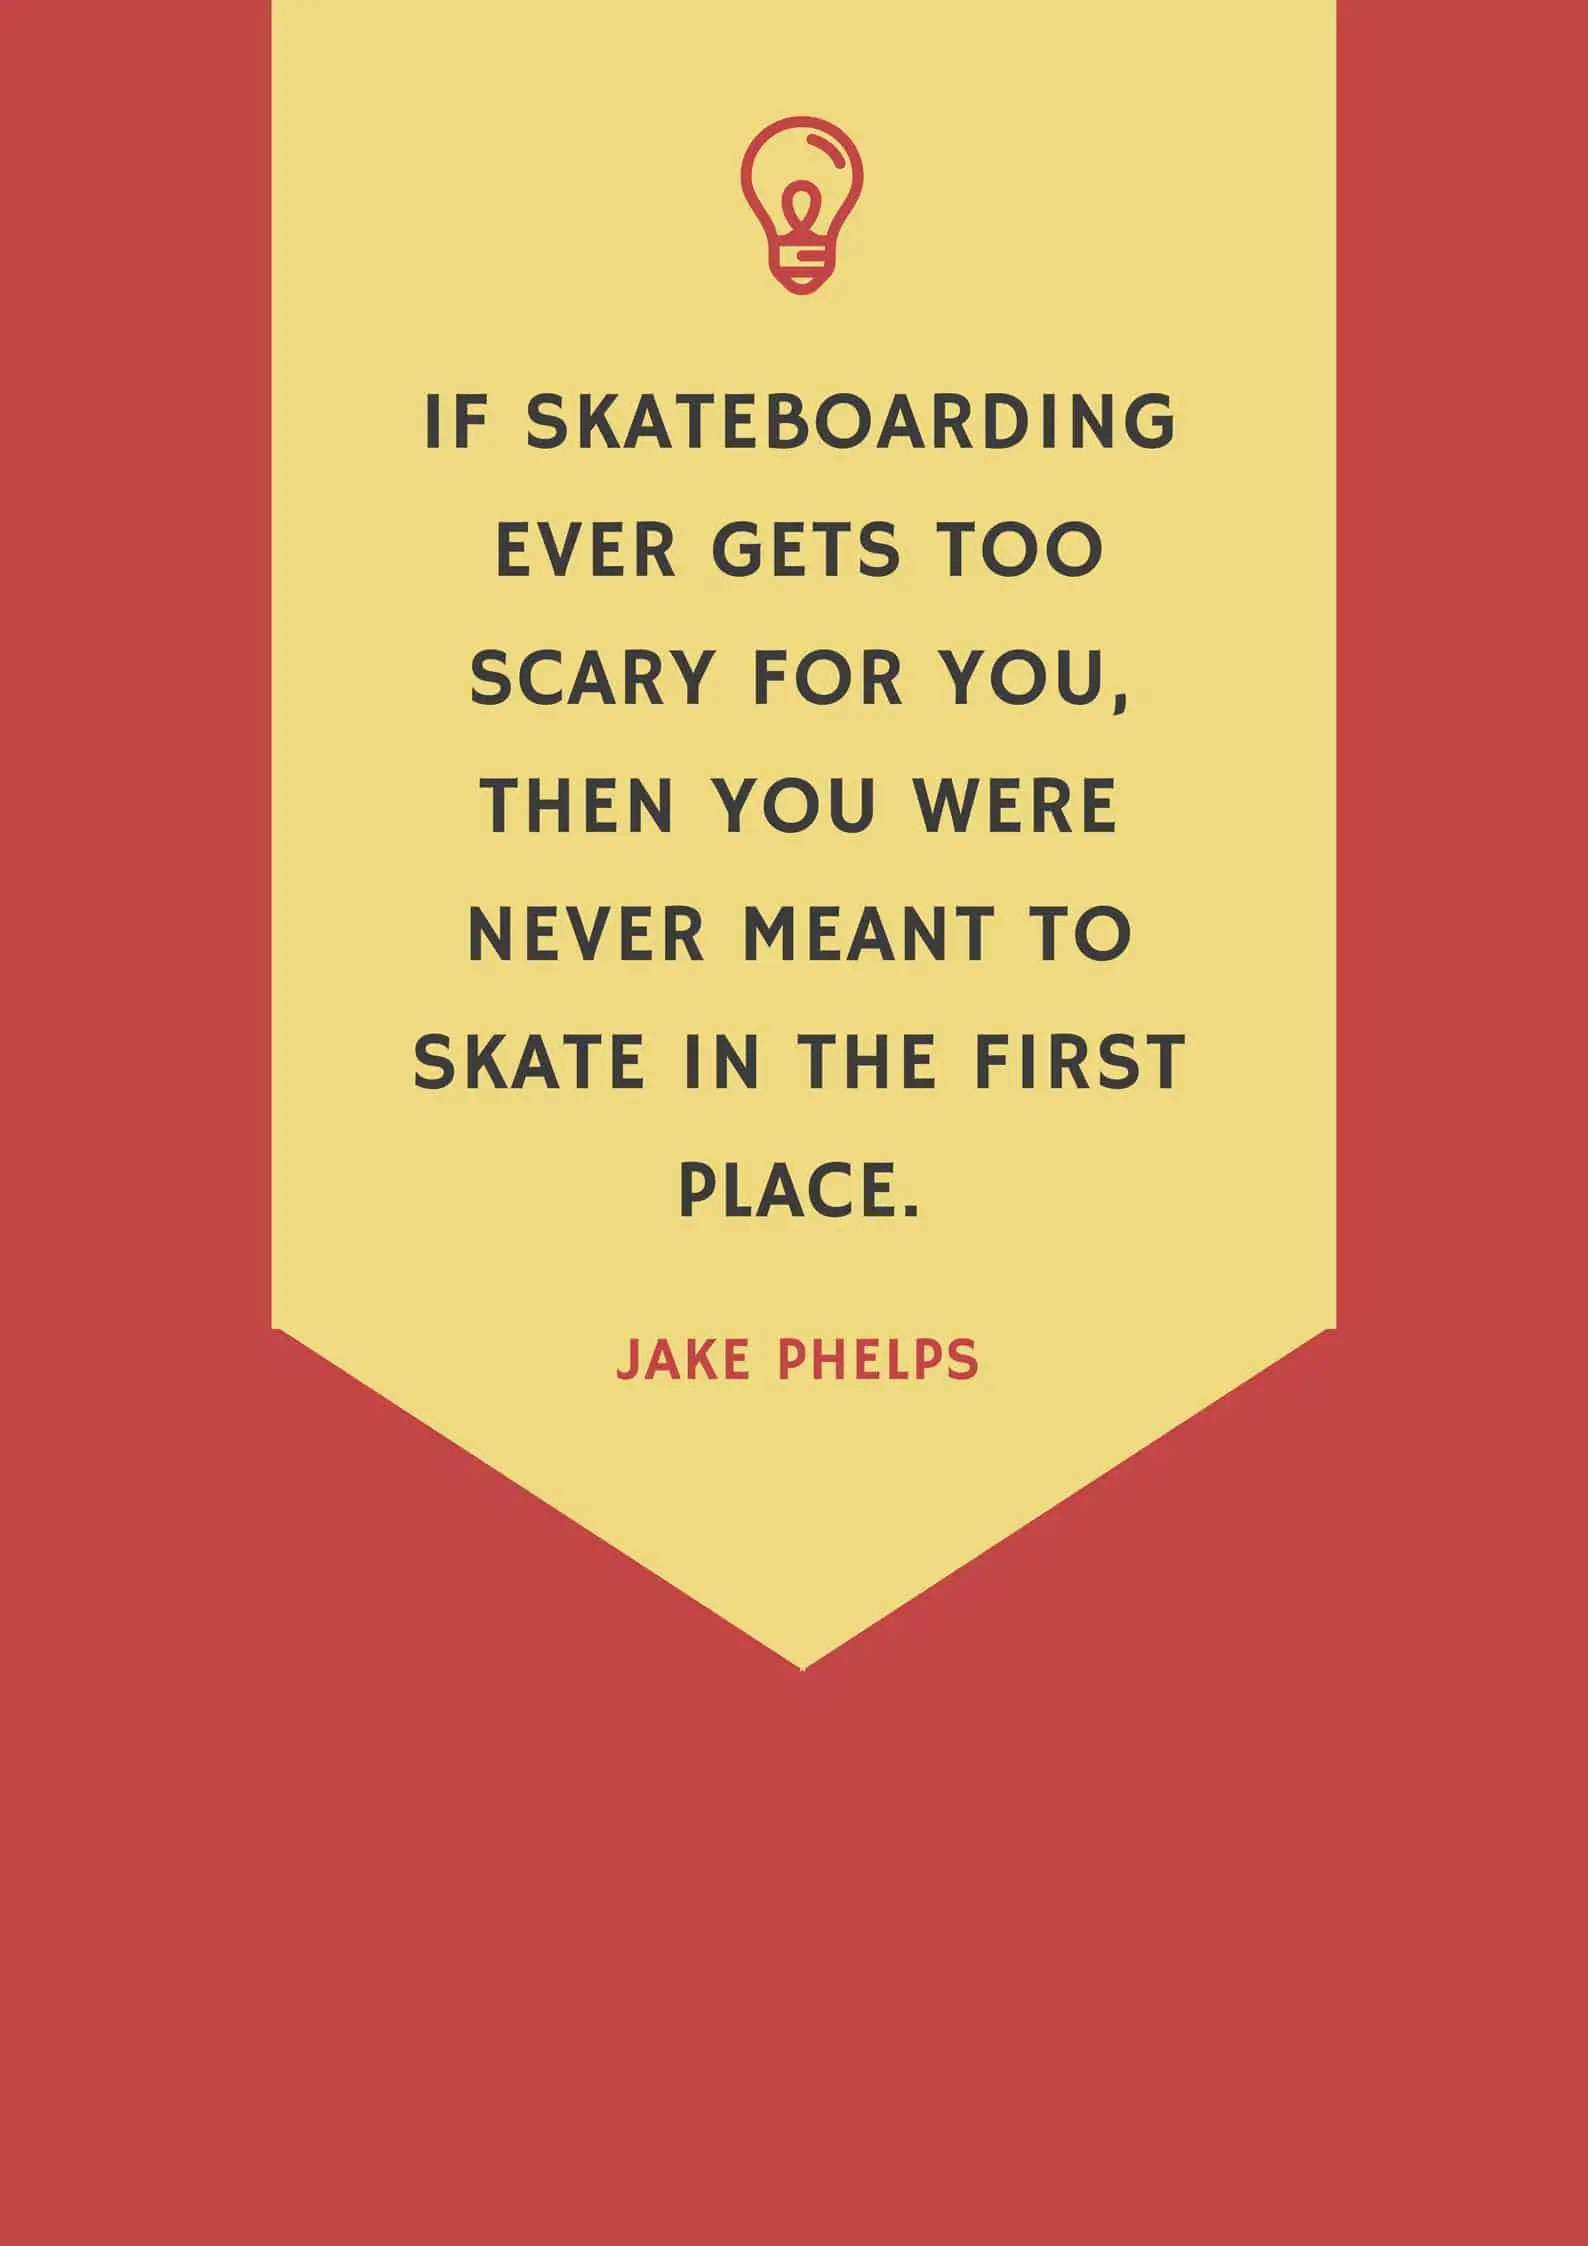 IF SKATEBOARDING EVER GETS TOO SCARY FOR YOU, THEN YOU WERE NEVER MEANT TO SKATE IN THE FIRST PLACE.